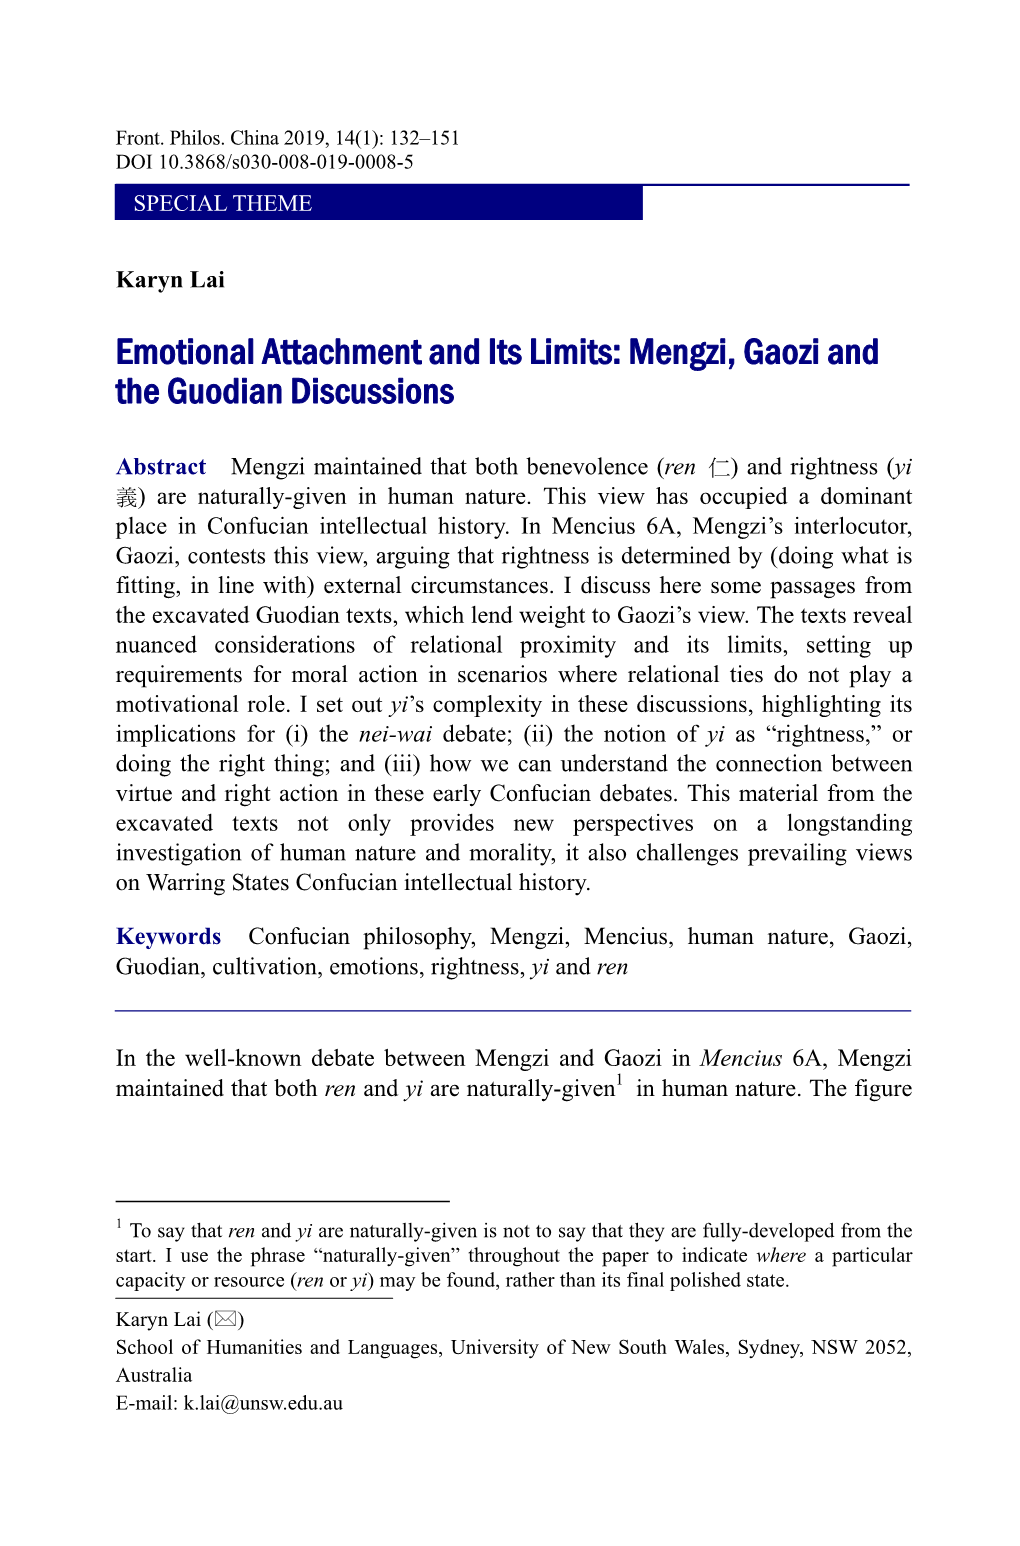 Emotional Attachment and Its Limits: Mengzi, Gaozi and the Guodian Discussions